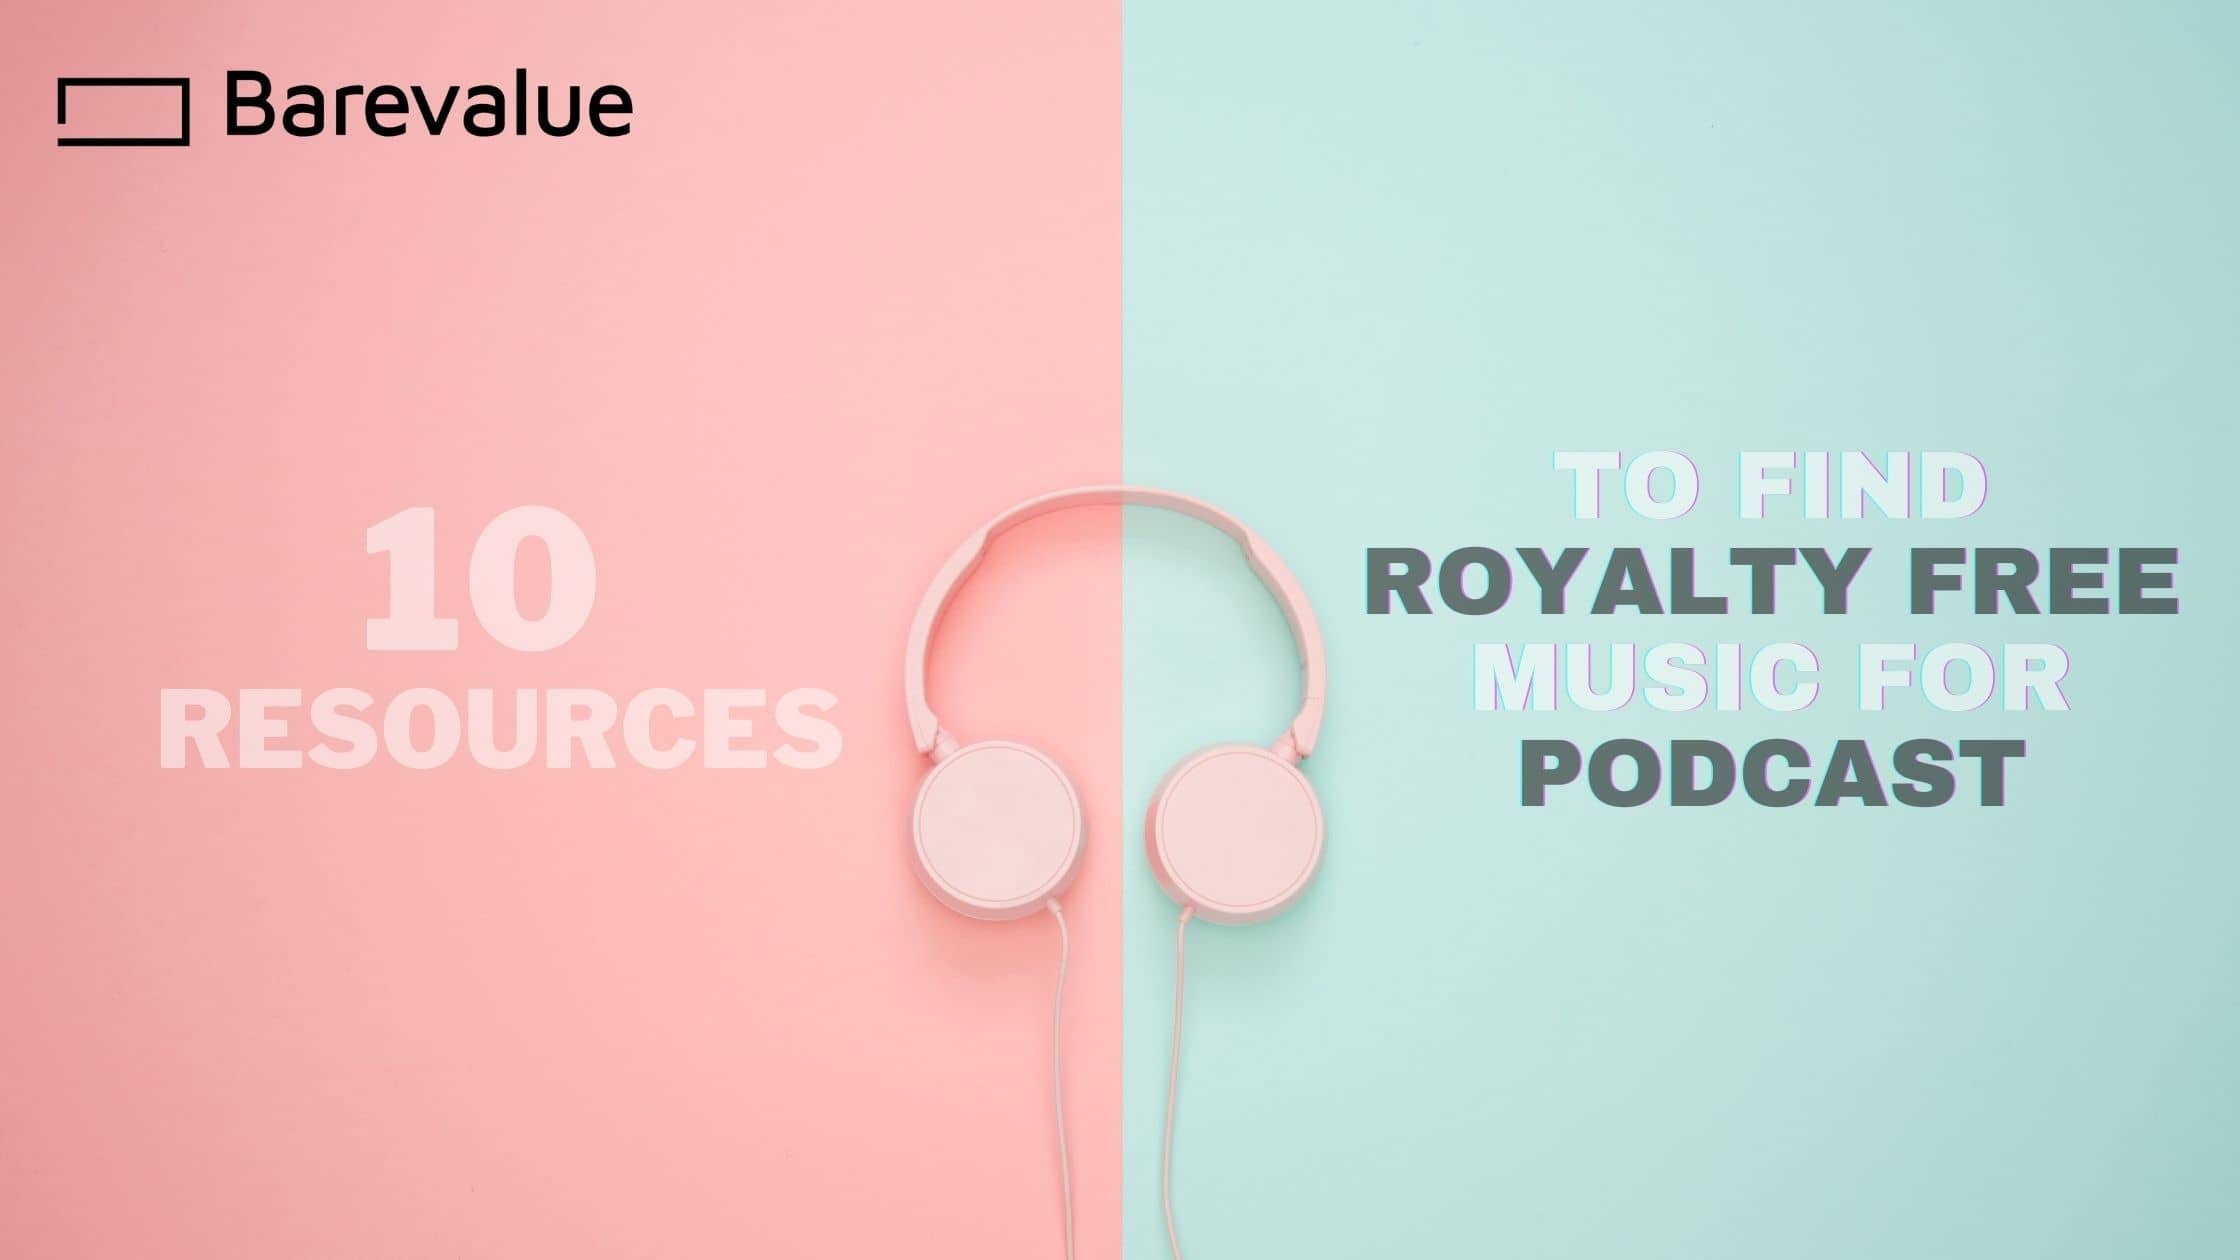 10 Resources to Find Royalty-Free Music for Podcast